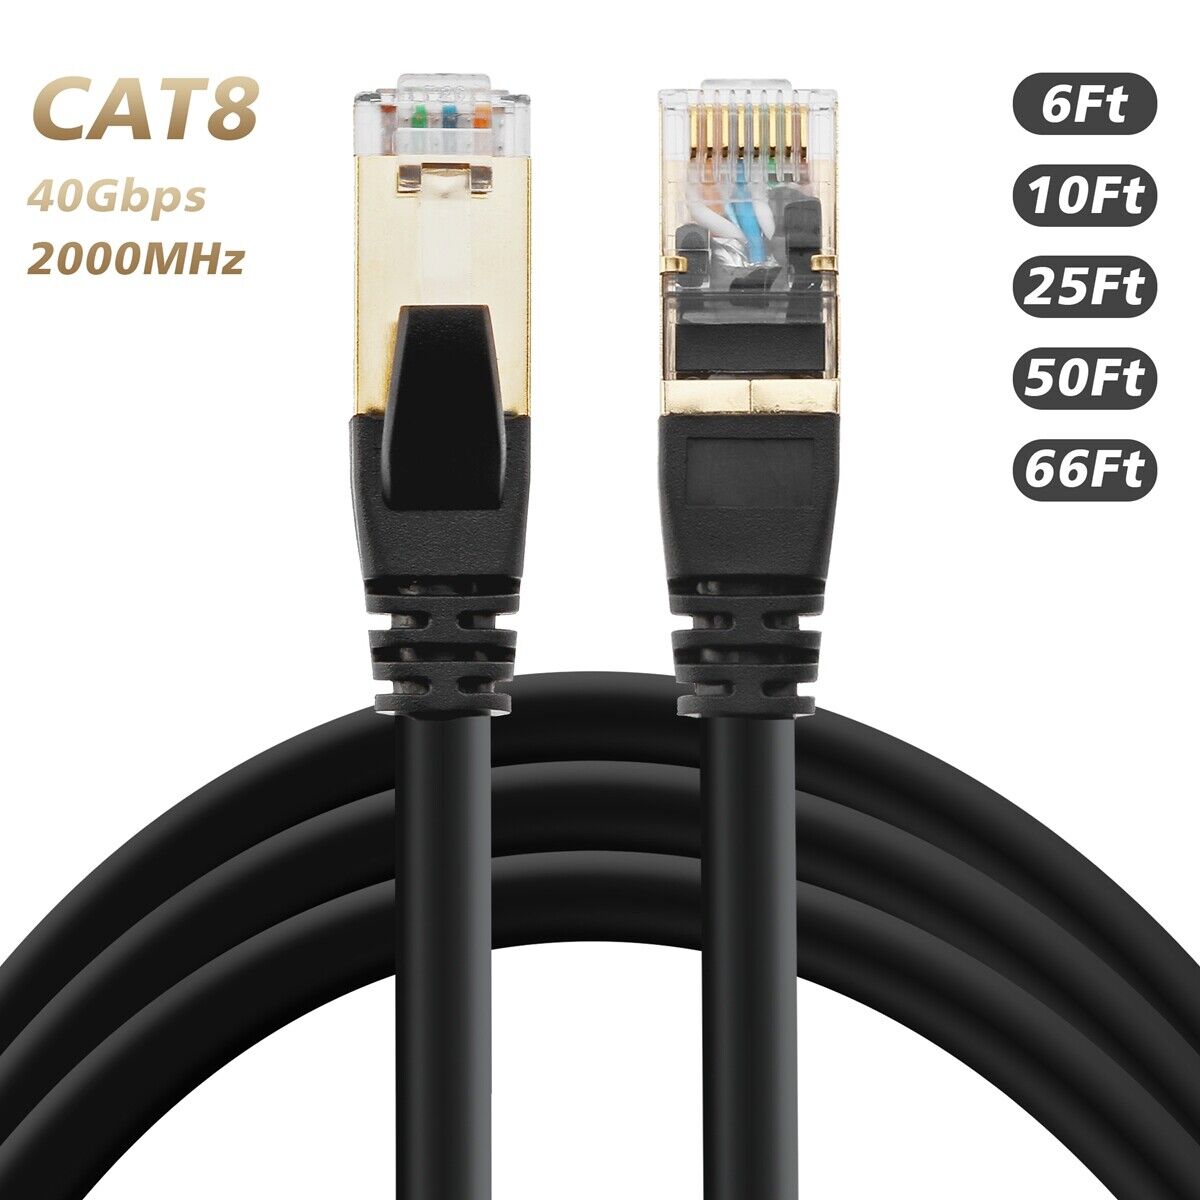 Cat 8 Cable, Category 8 S/FTP 40Gbps Ethernet Cable Wide Compatibility US Lot